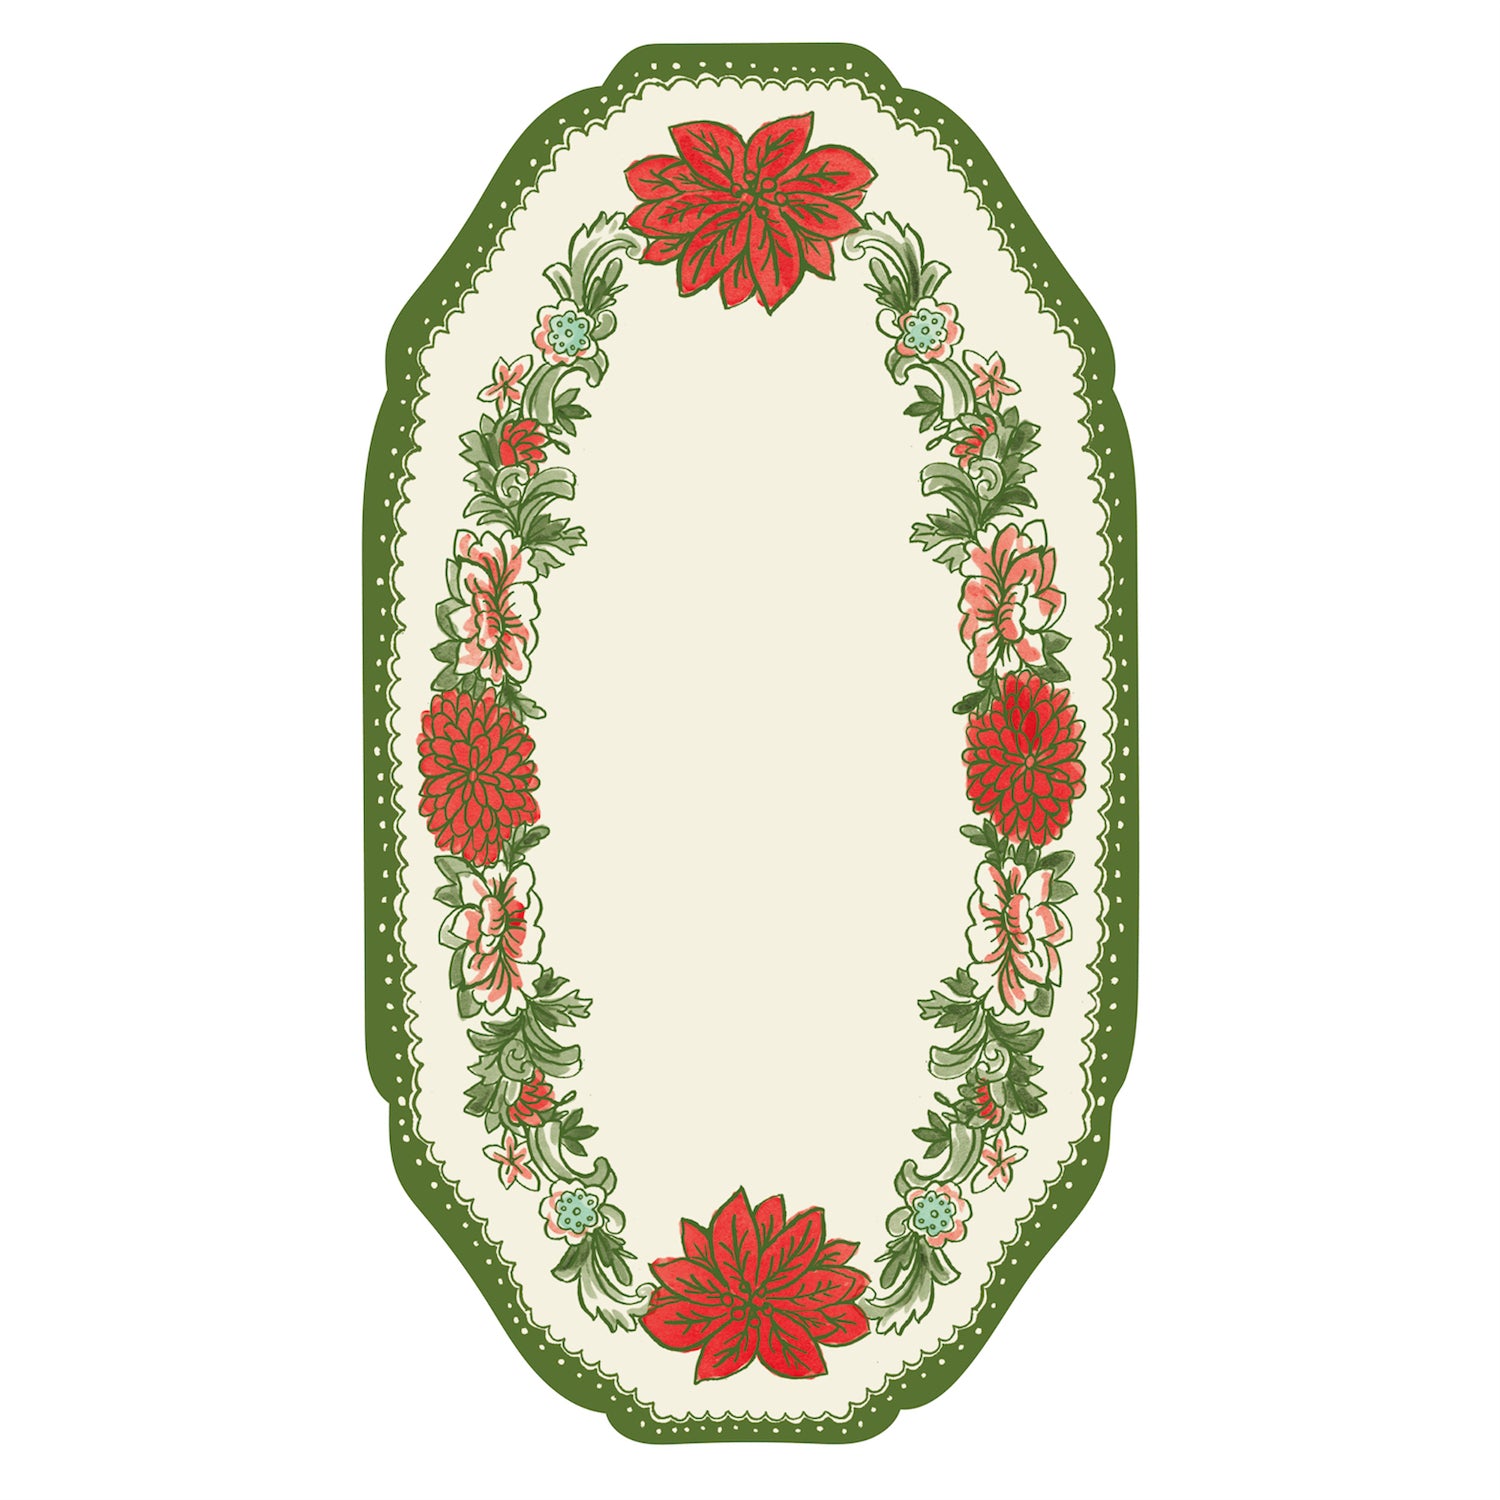 A die-cut beveled oval table accent framed in vintage-style illustrated filagree in red and green holiday florals.